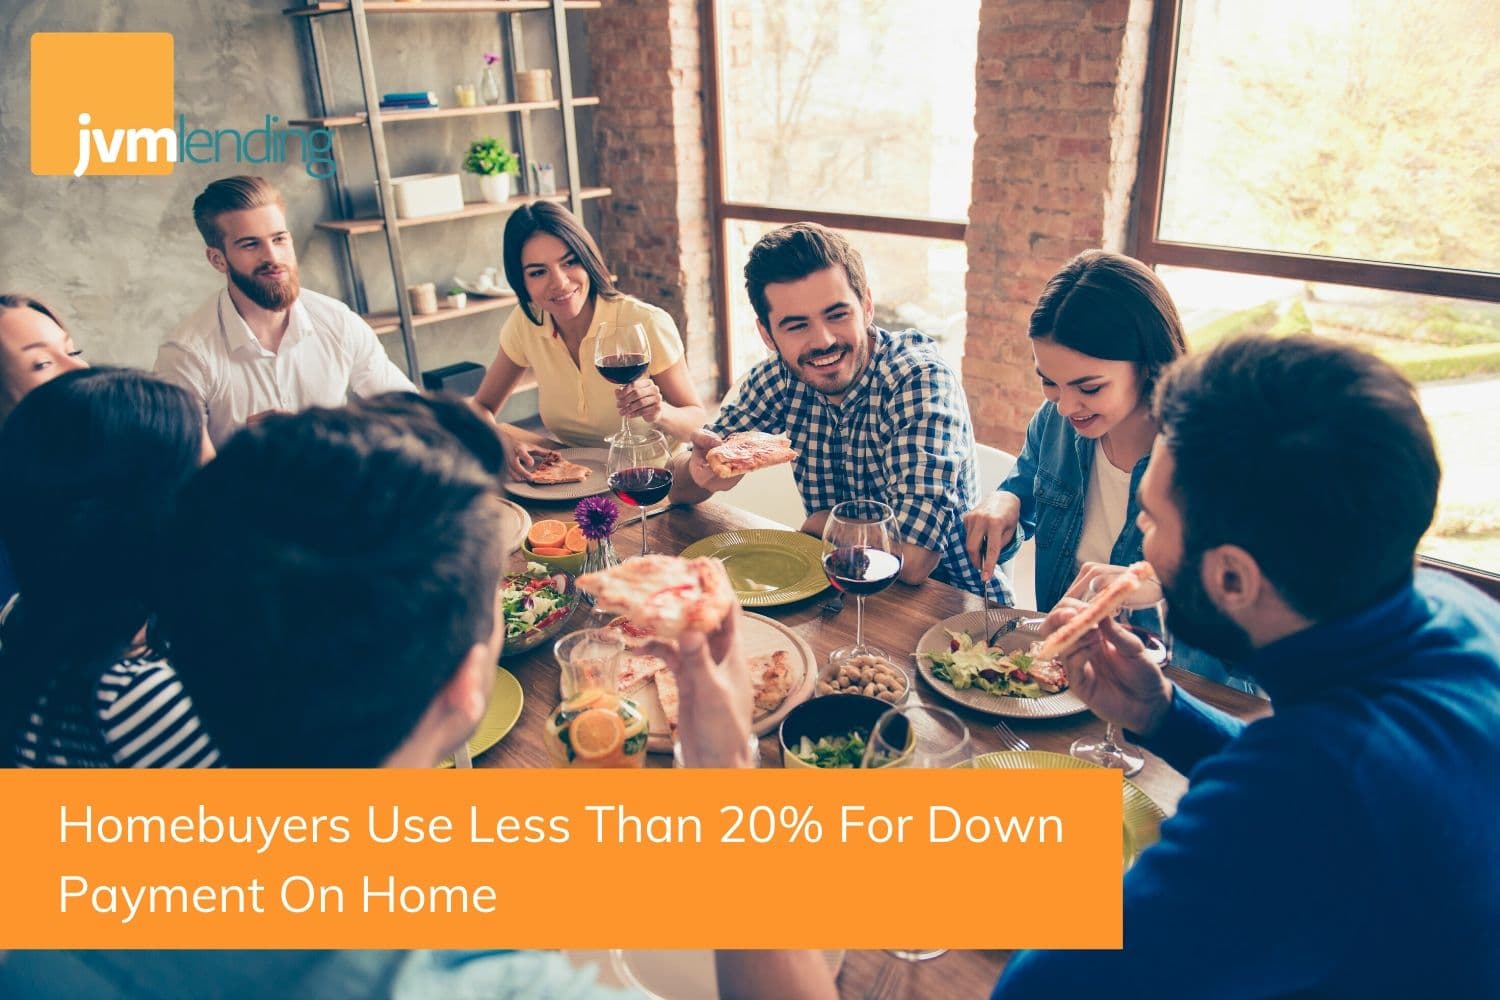 A group of friends celebrate the new homebuyers in their group with a dinner party. First-time homebuyers can purchase property with less than 20% down payment.